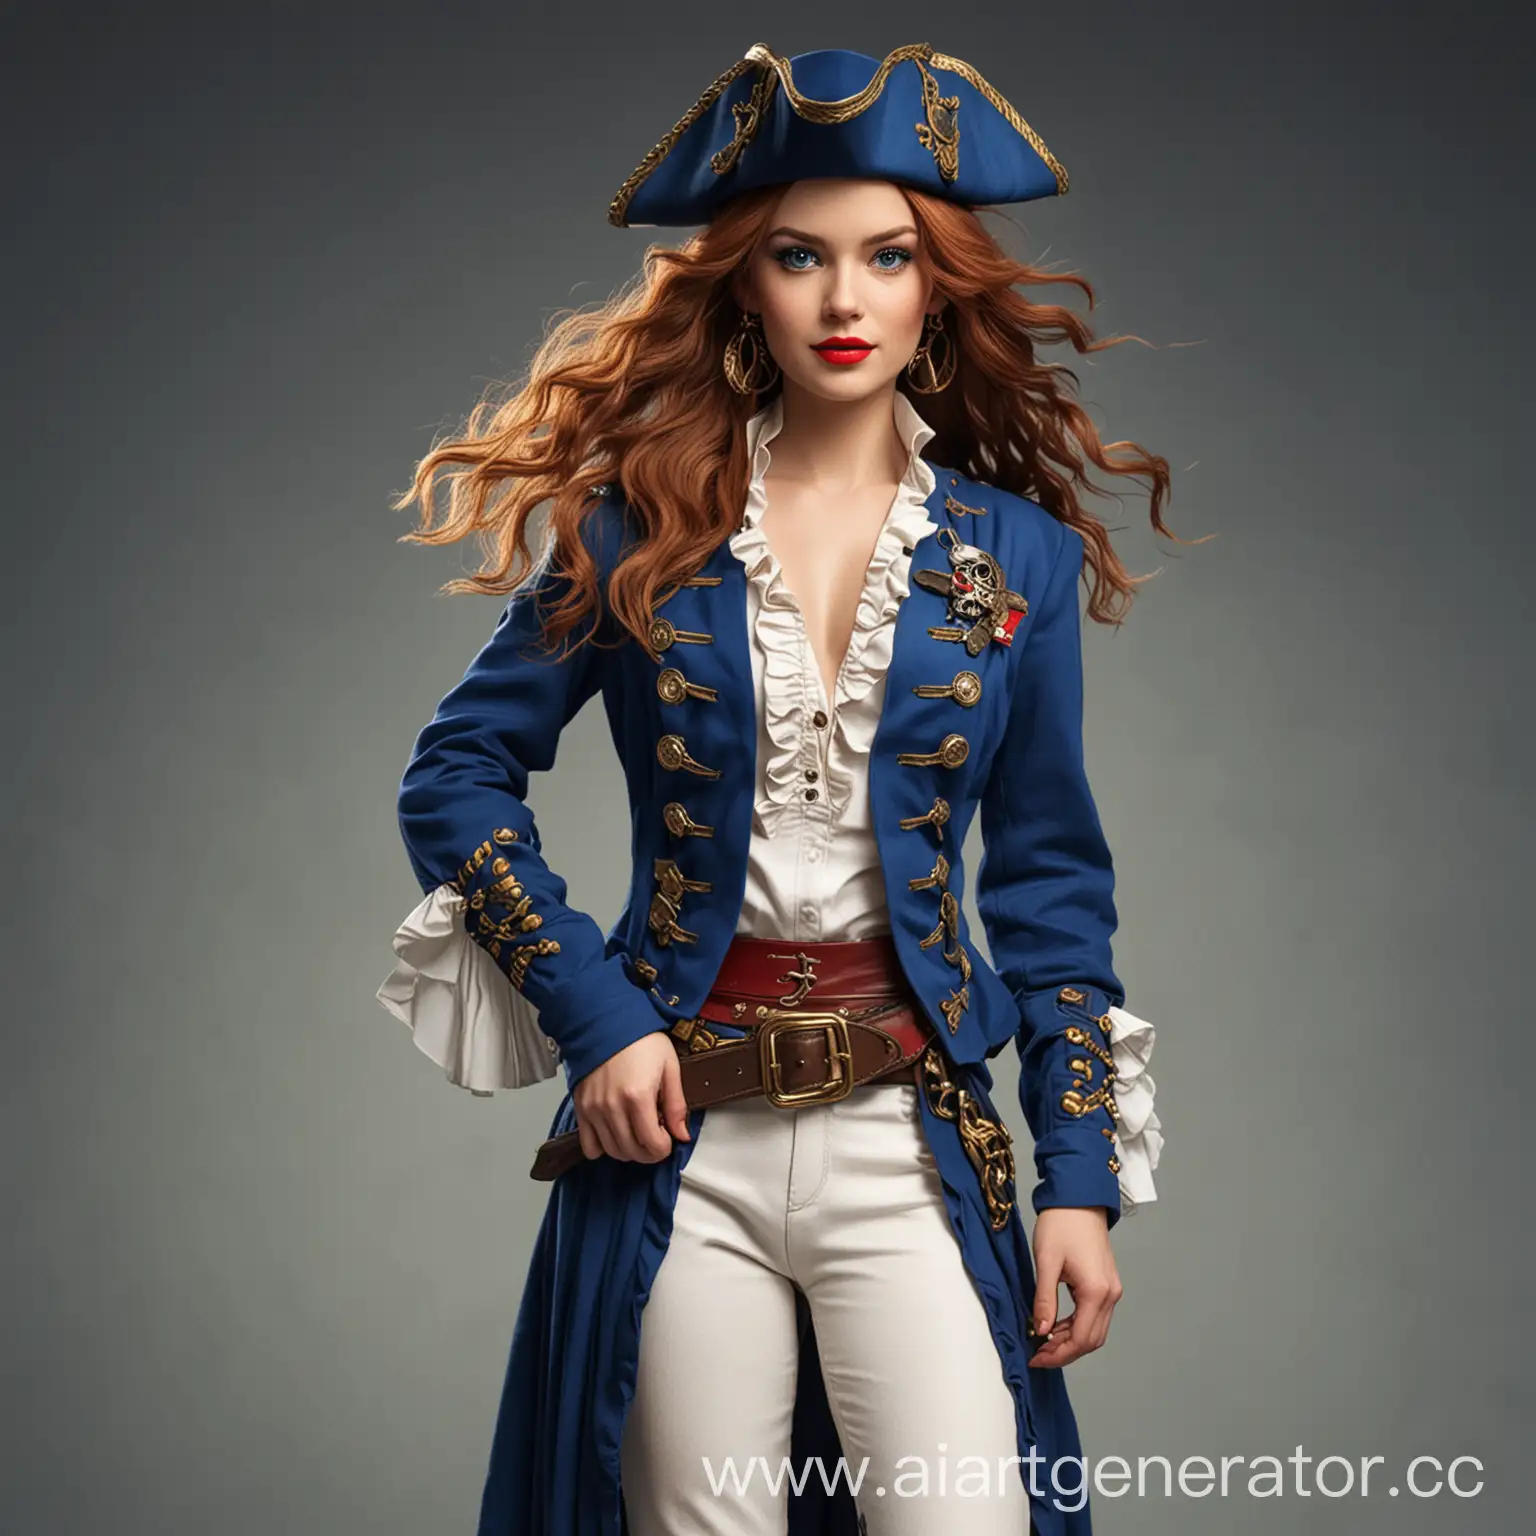 RussetHaired-Girl-Pirate-Captain-in-Blue-Attire-with-Saber-and-Golden-Earrings